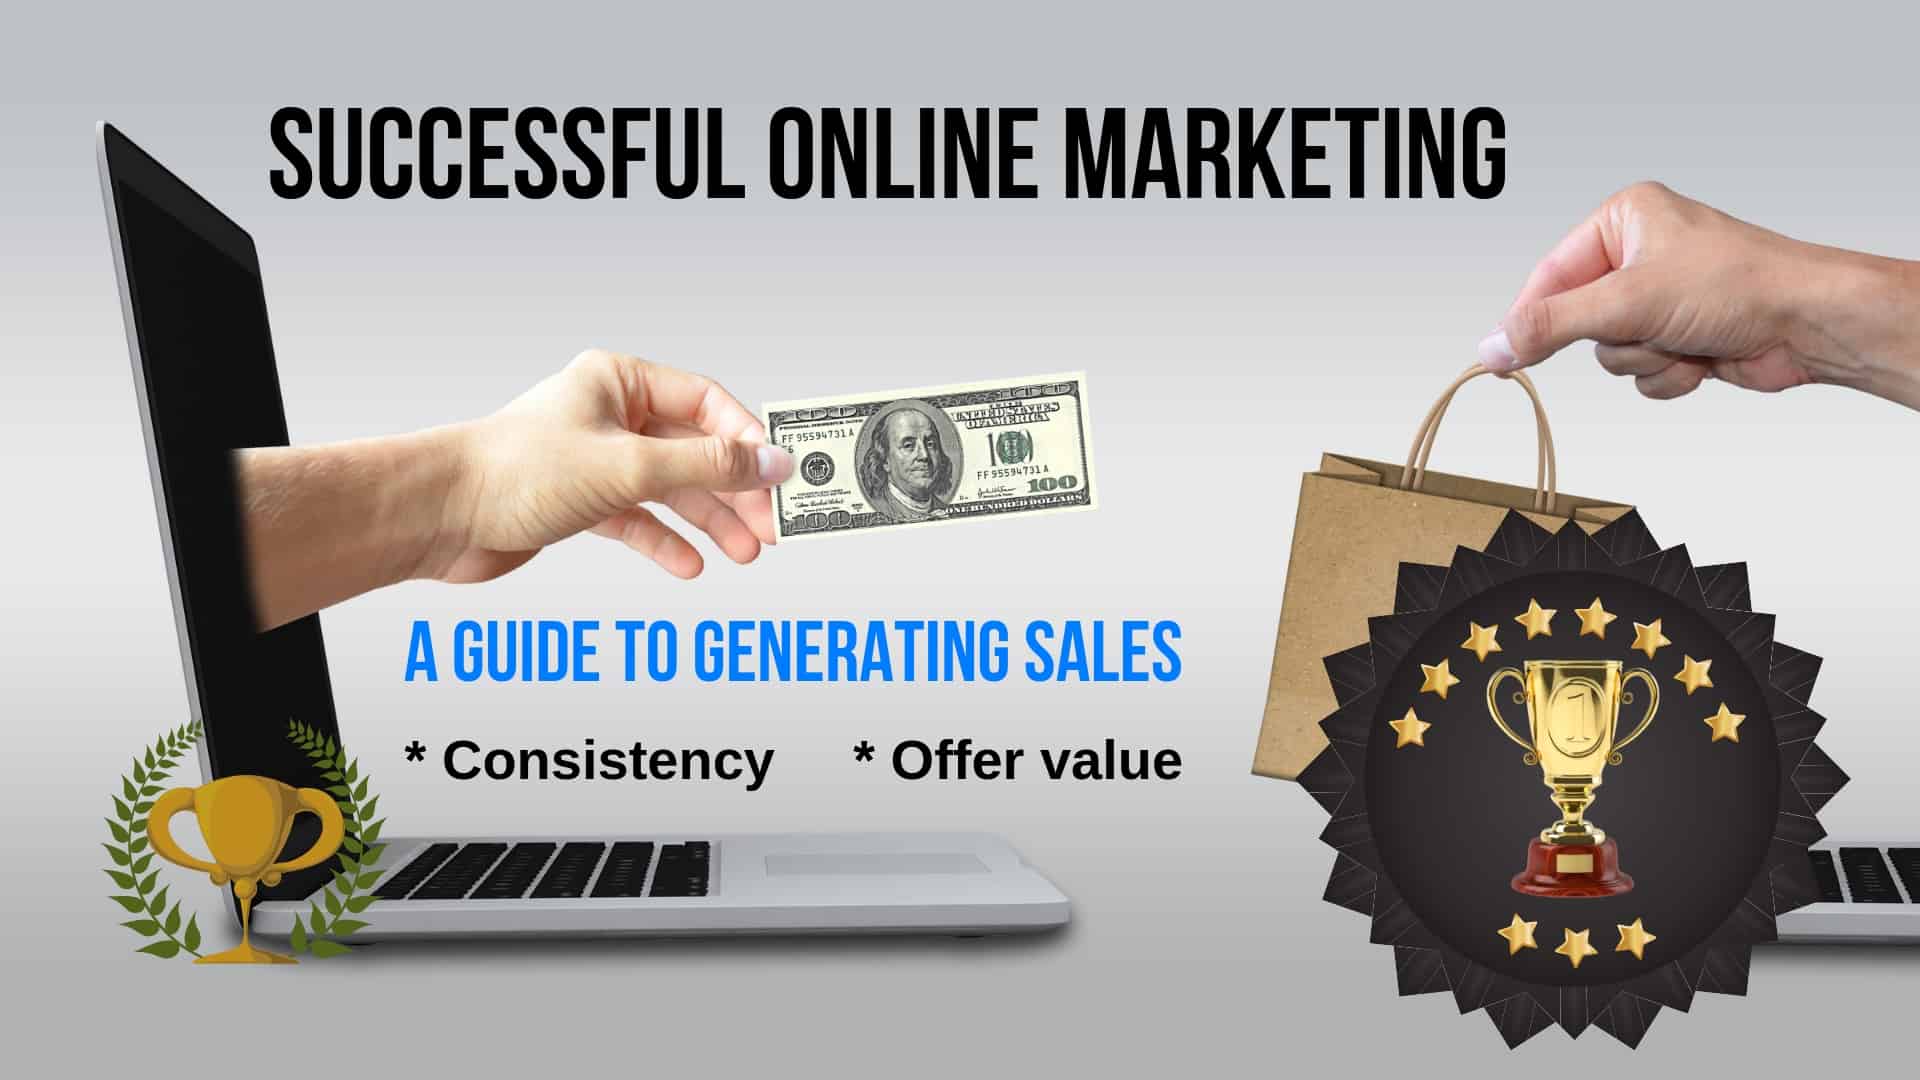 Successful online marketing and sales guide